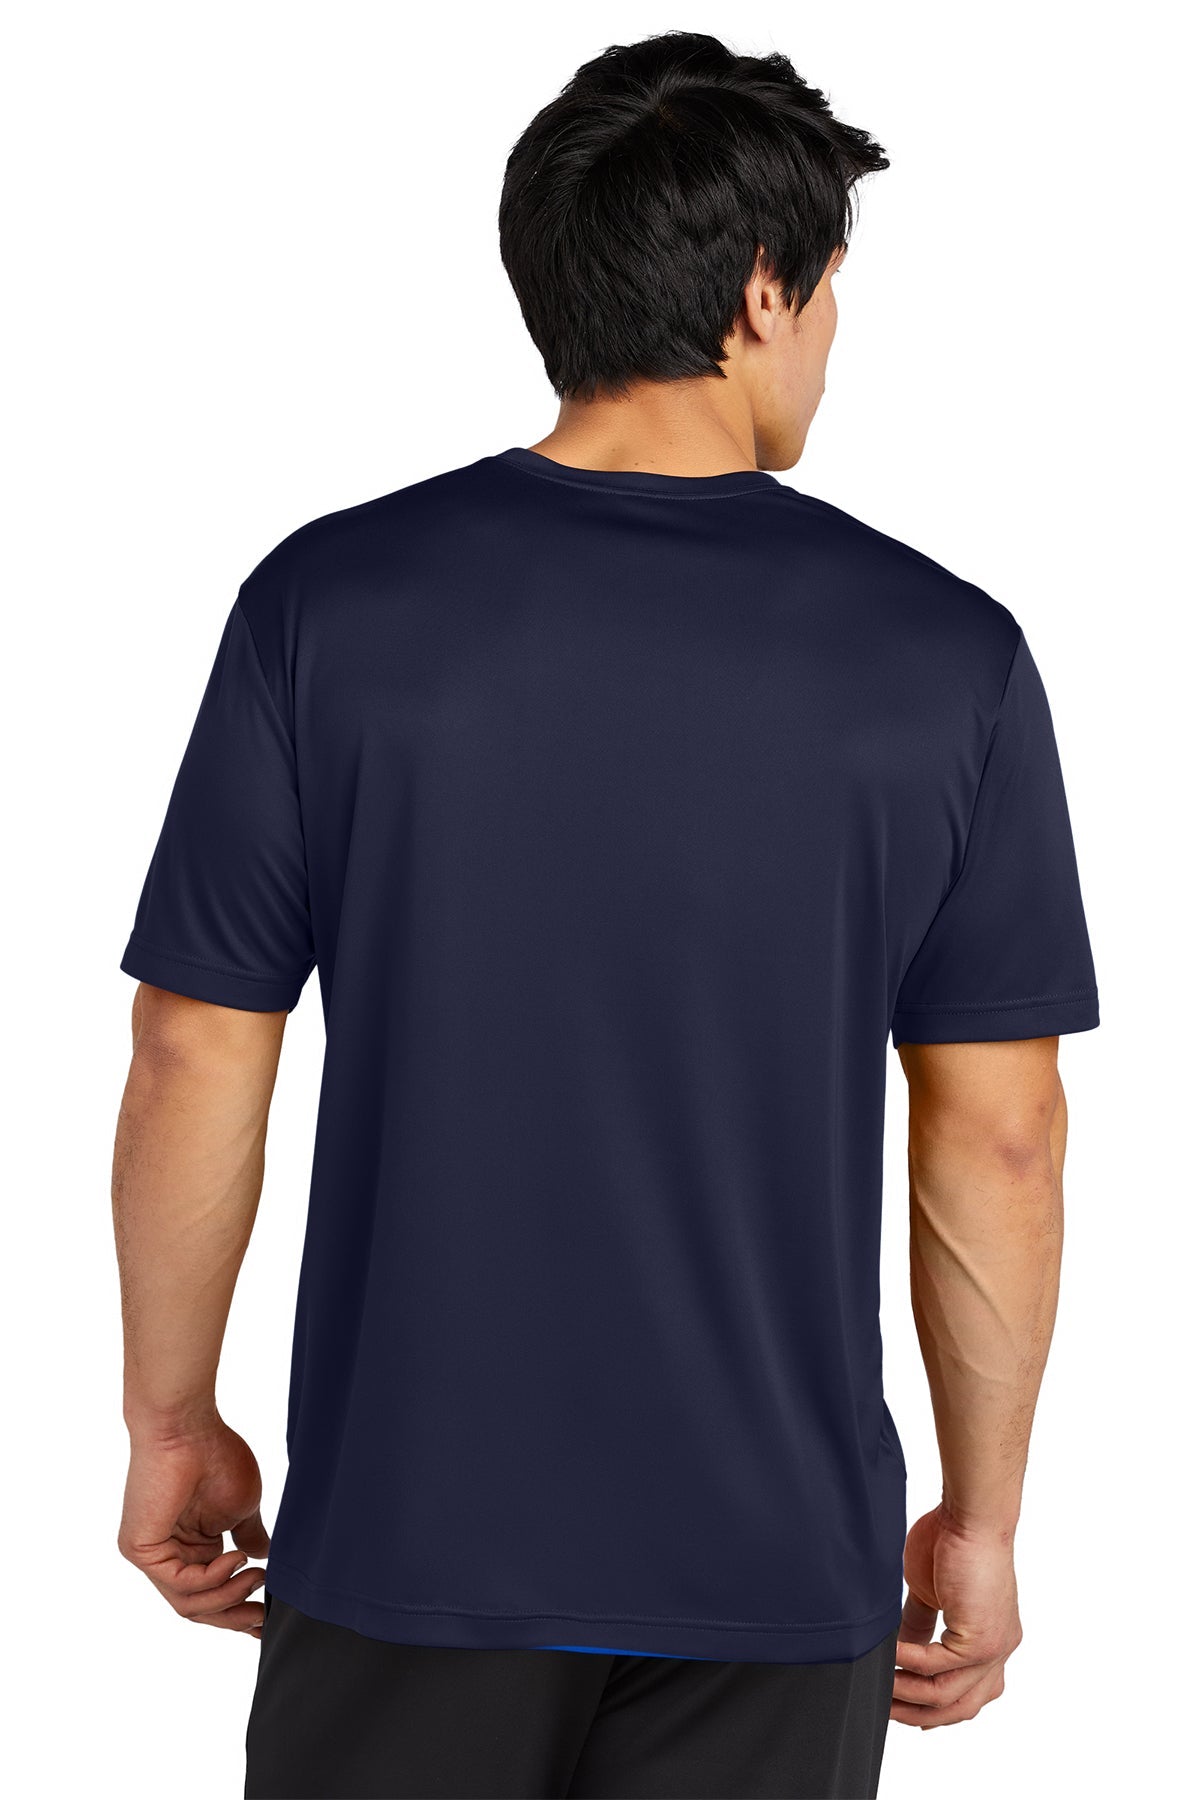 Sport-Tek PosiCharge Customized Re-Compete Tee's, True Navy